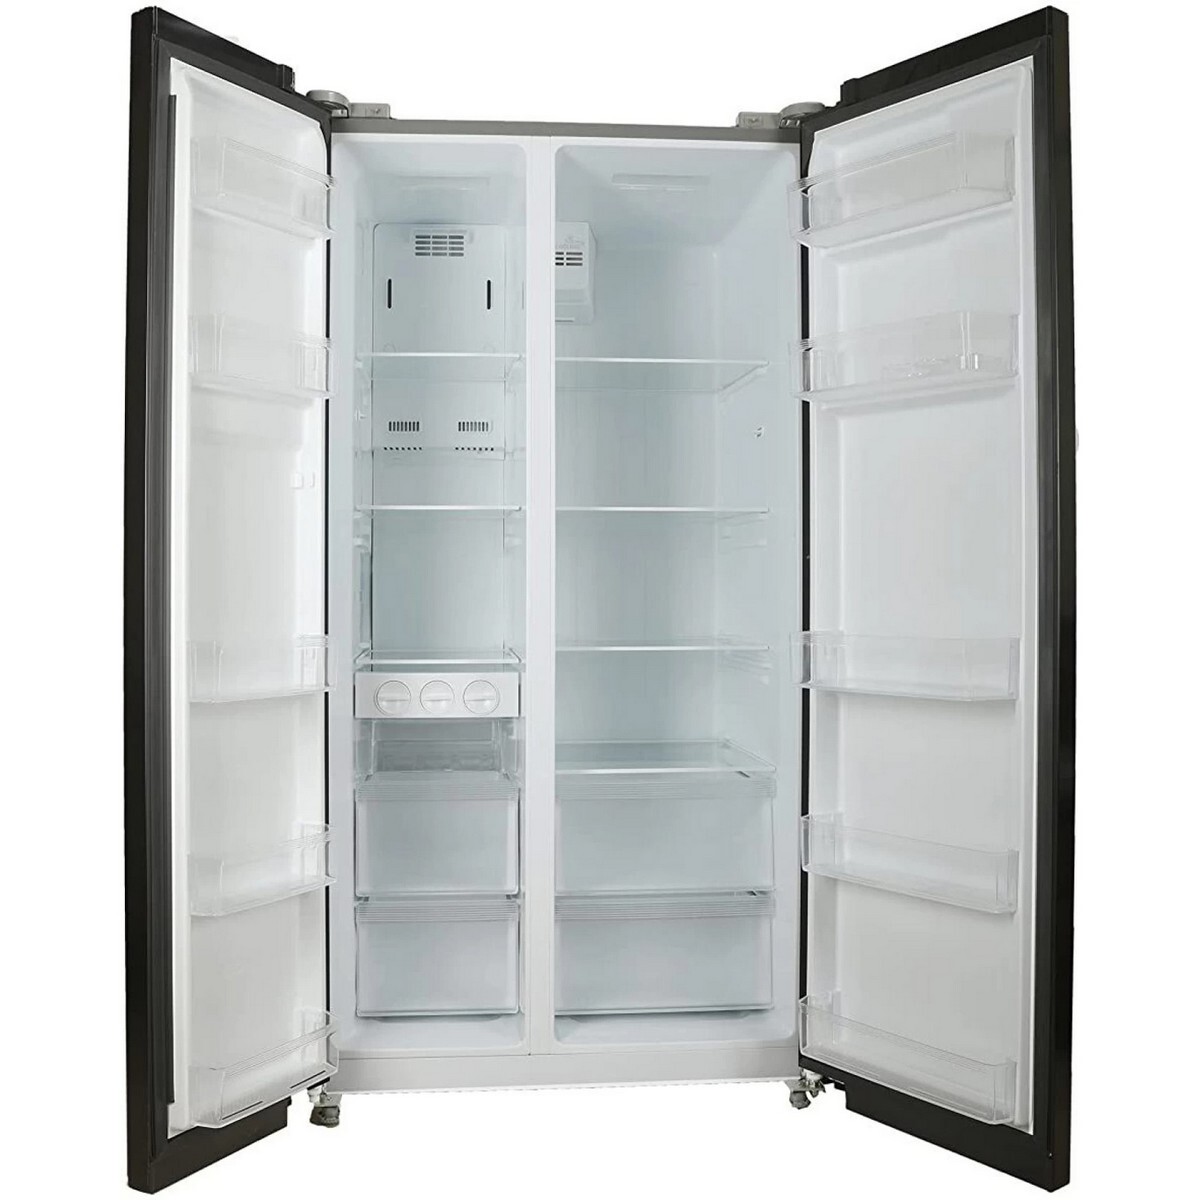 Lloyd Frost Free Side by Side Refrigerator GLSF590DGGT1GB 587 Ltr Graphite